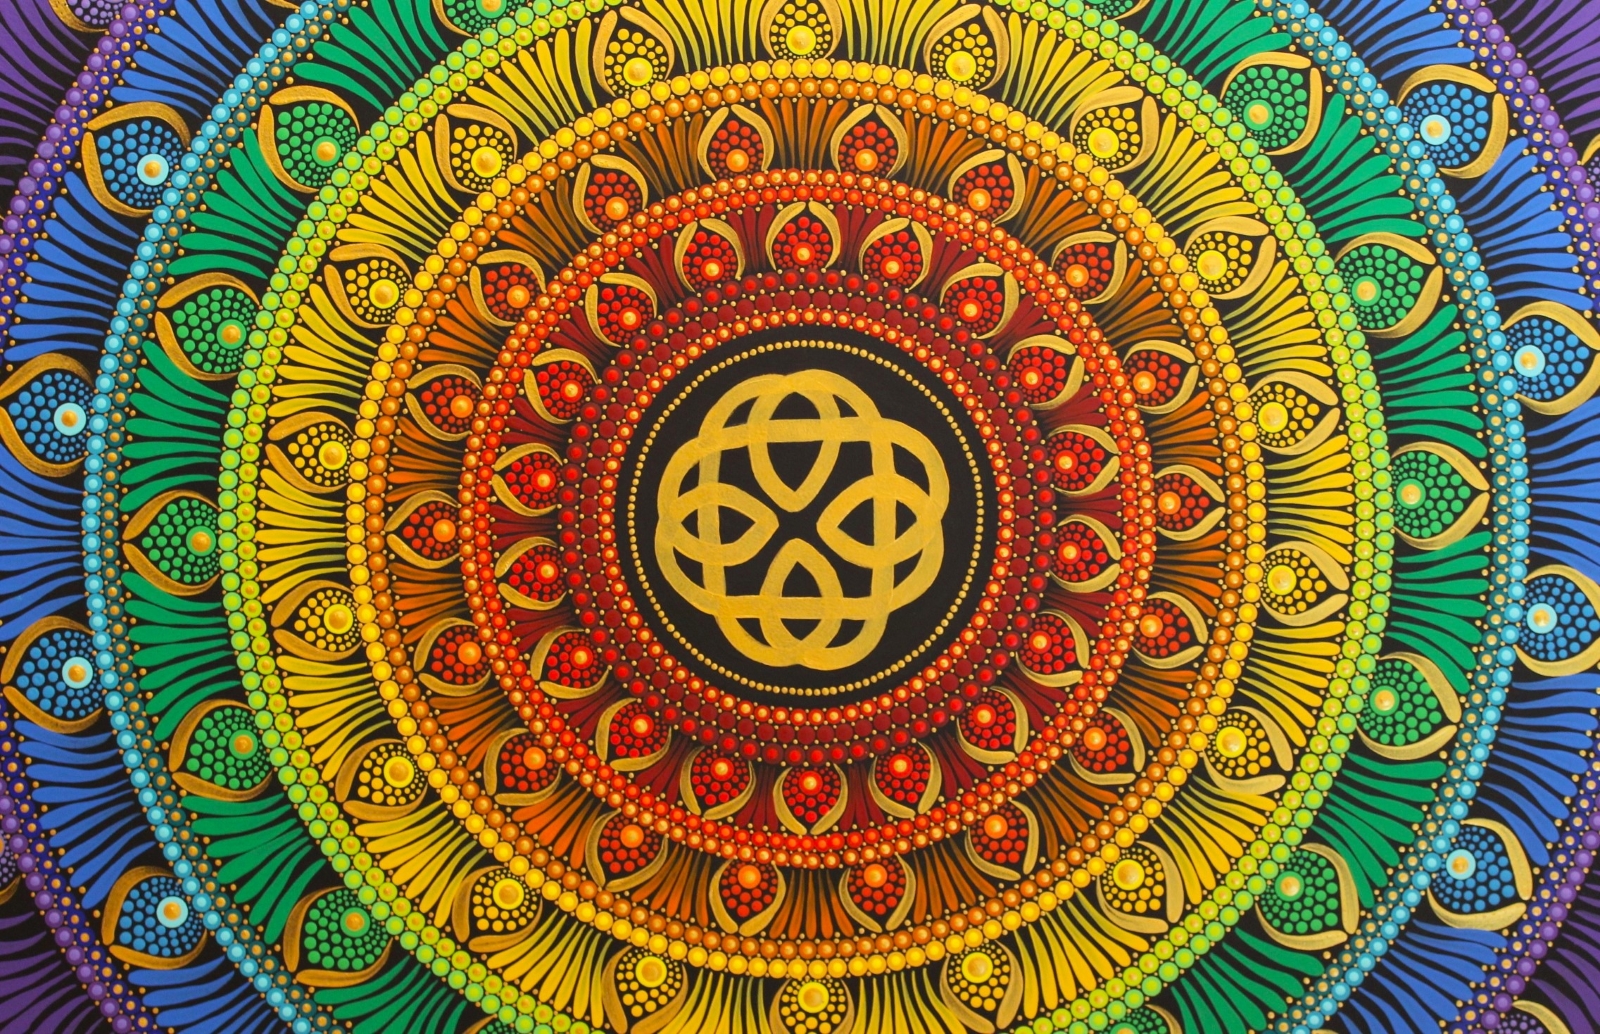 You are currently viewing Die wunderbare Welt der Mandalas